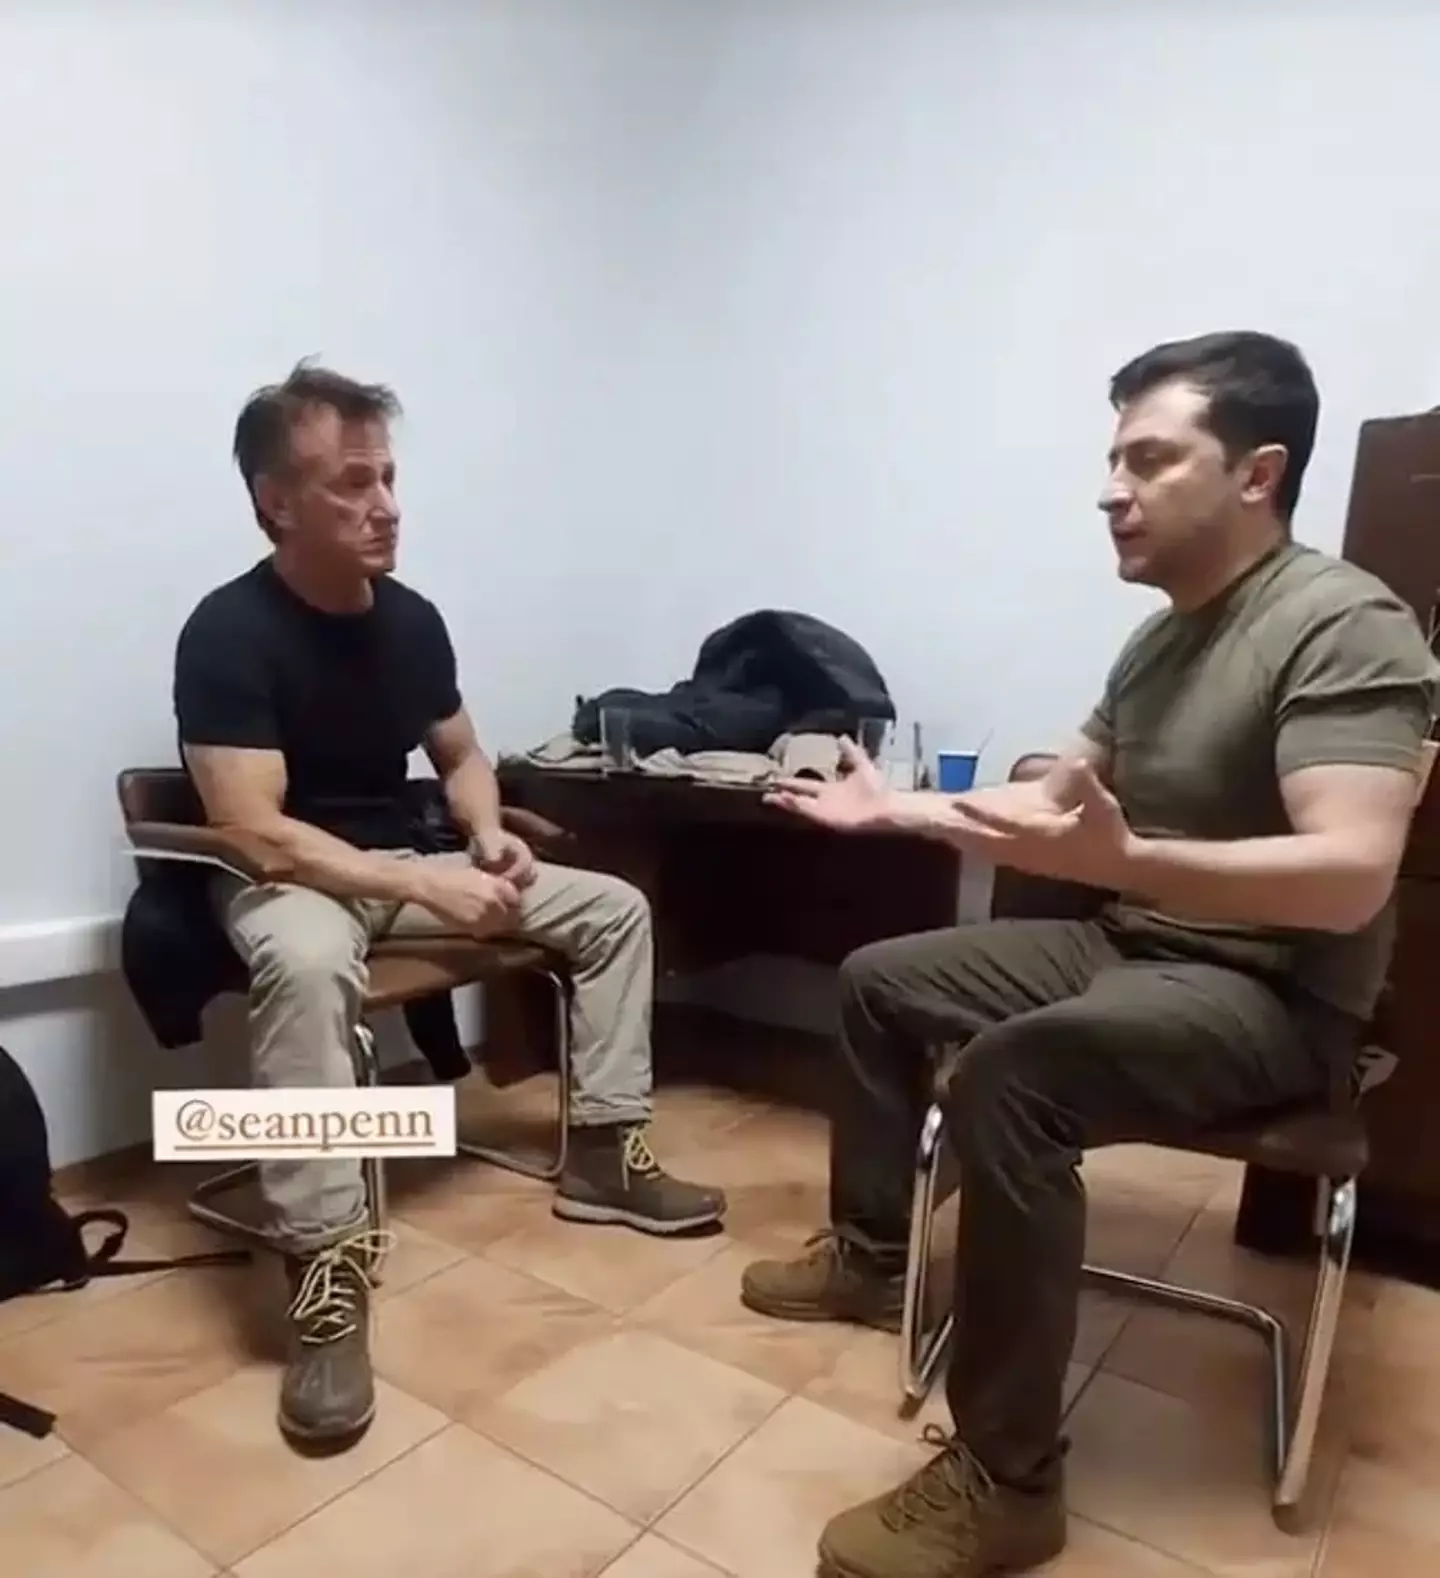 Sean Penn was in Ukraine filming a documentary when Putin launched his invasion.